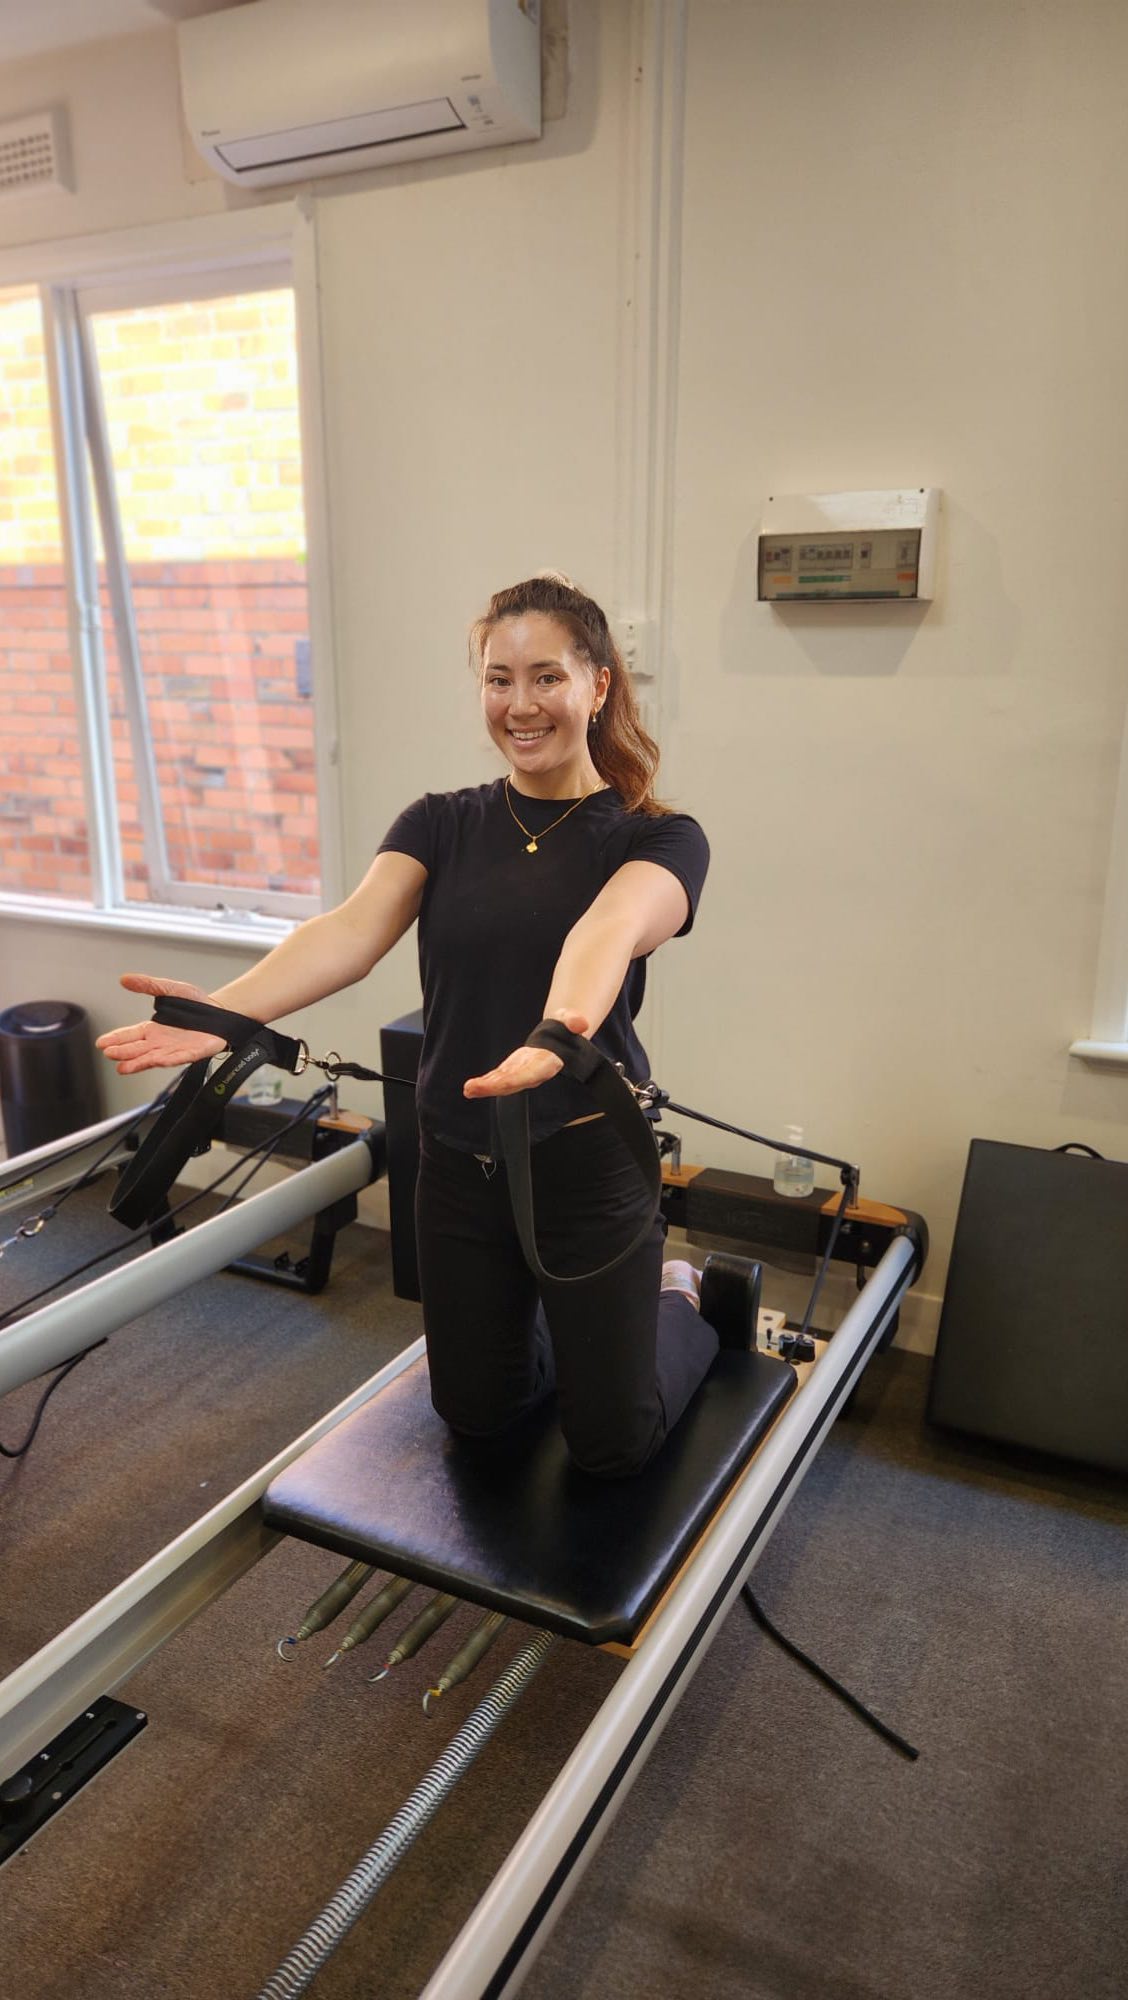 Kneeling upright rows or offerings on the reformer
Is a wonderful exercise to help build shoulder stability, strength, and control. To progress and activate your quads perform from kneeling to high kneeling for an extra challenge
️